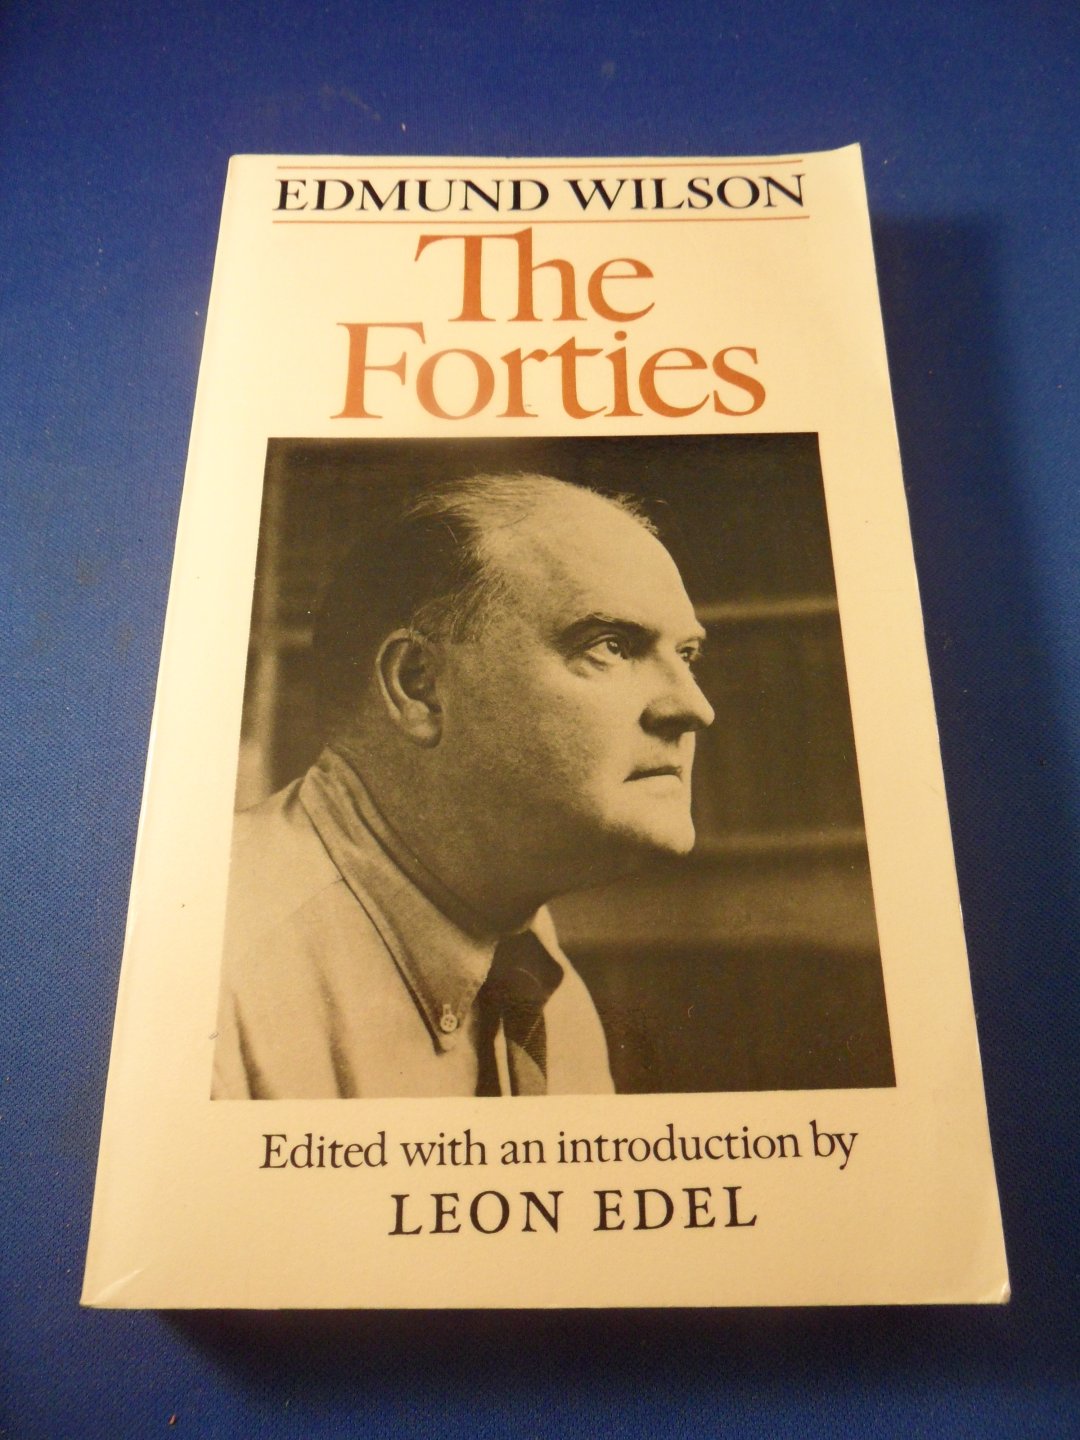 Wilson, Edmund - The Forties, edited with an introduction by Leon Edel